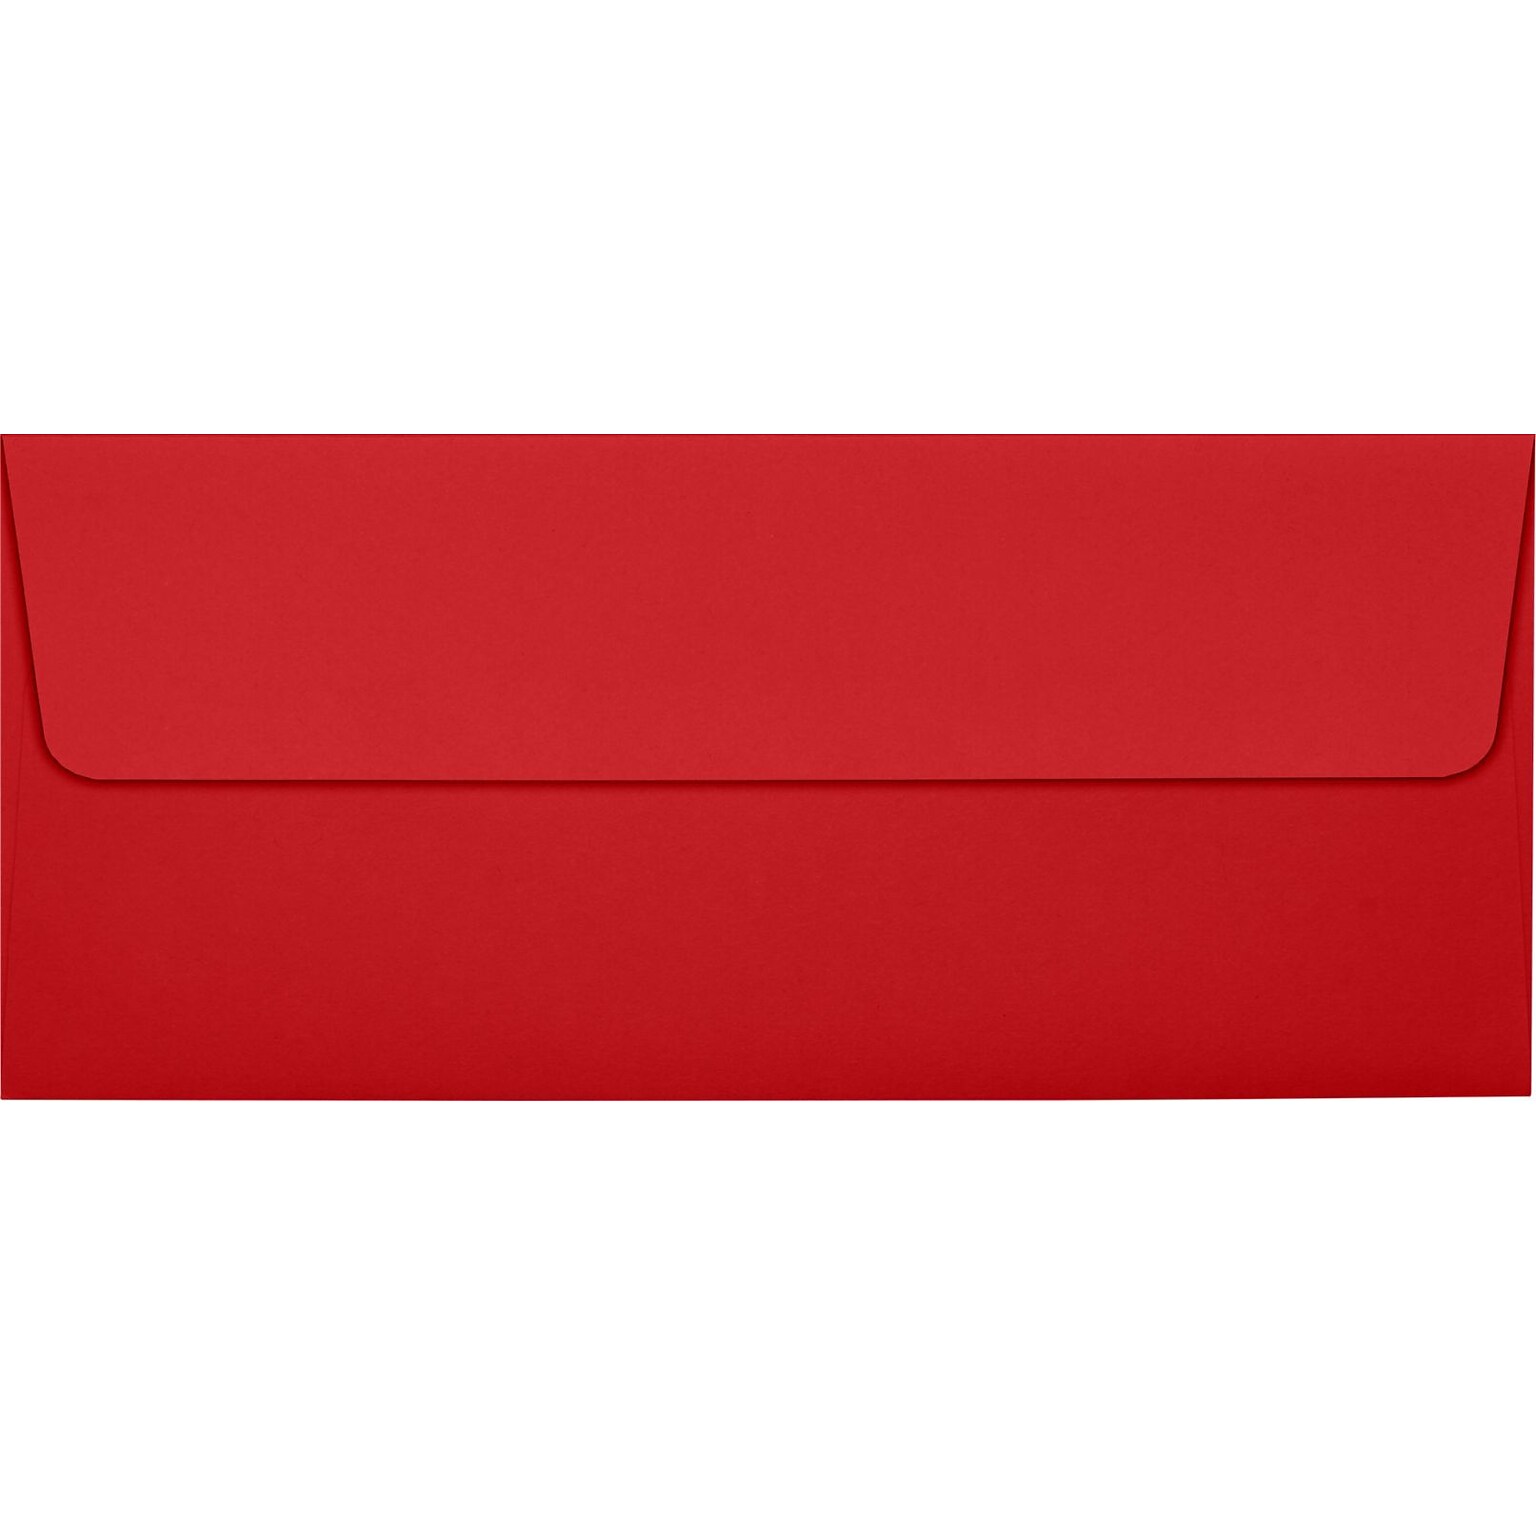 LUX Square Flap Self Seal #10 Invitation Envelope, 4 1/2 x 9 1/2, Ruby Red, 500/Box (EX4860-18-500)